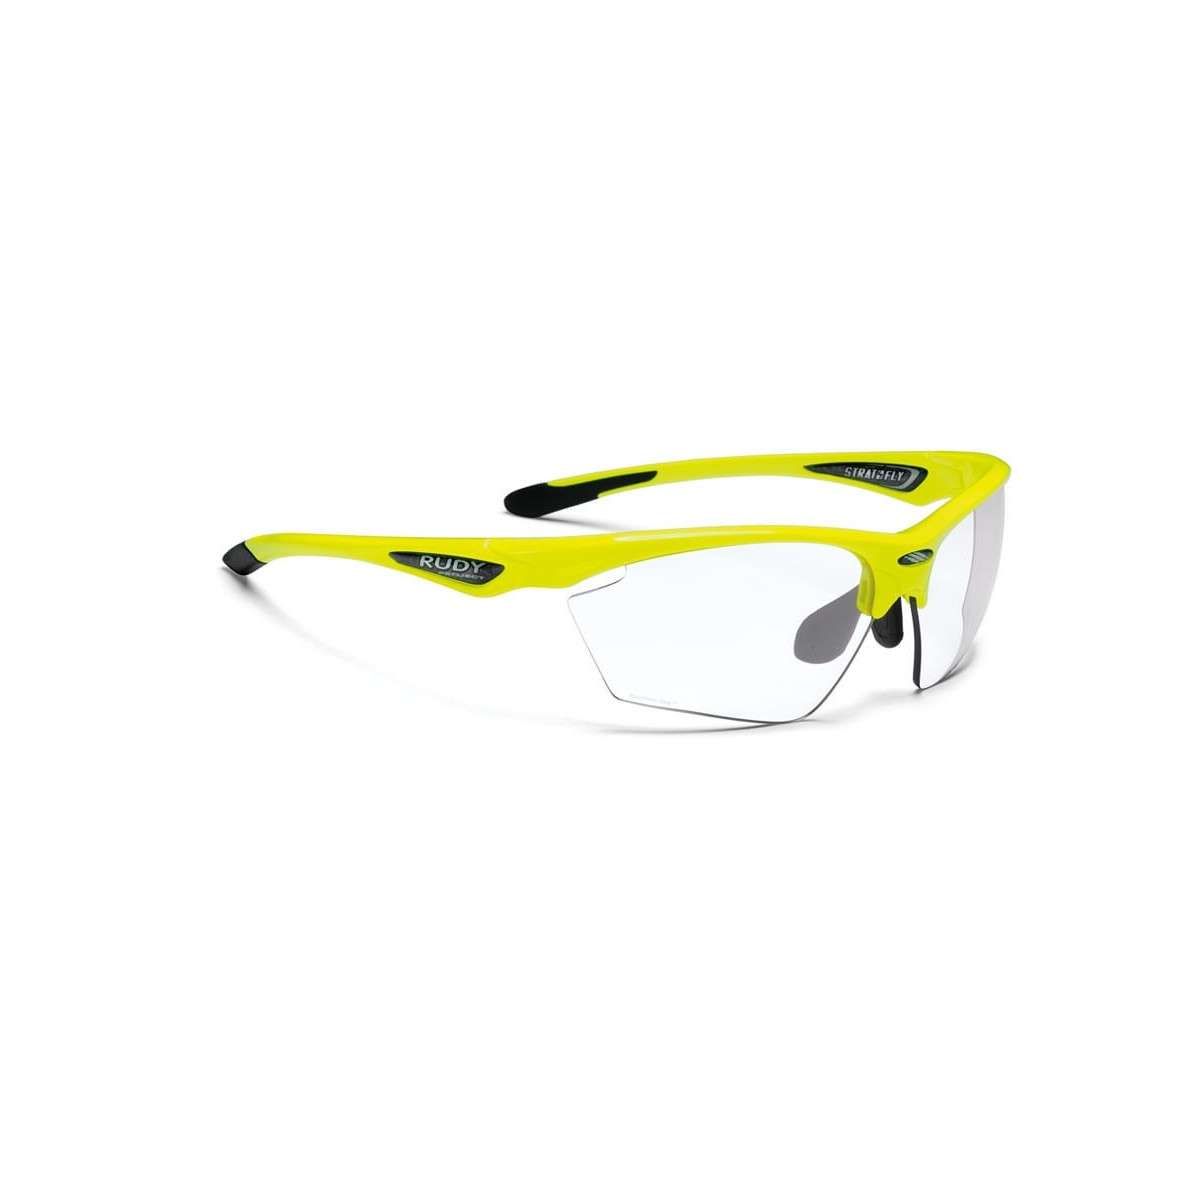 To Fly günstig Kaufen-Stratofly Yellow Fluo RPO Photoclear Rudy Project Brille. Stratofly Yellow Fluo RPO Photoclear Rudy Project Brille . 